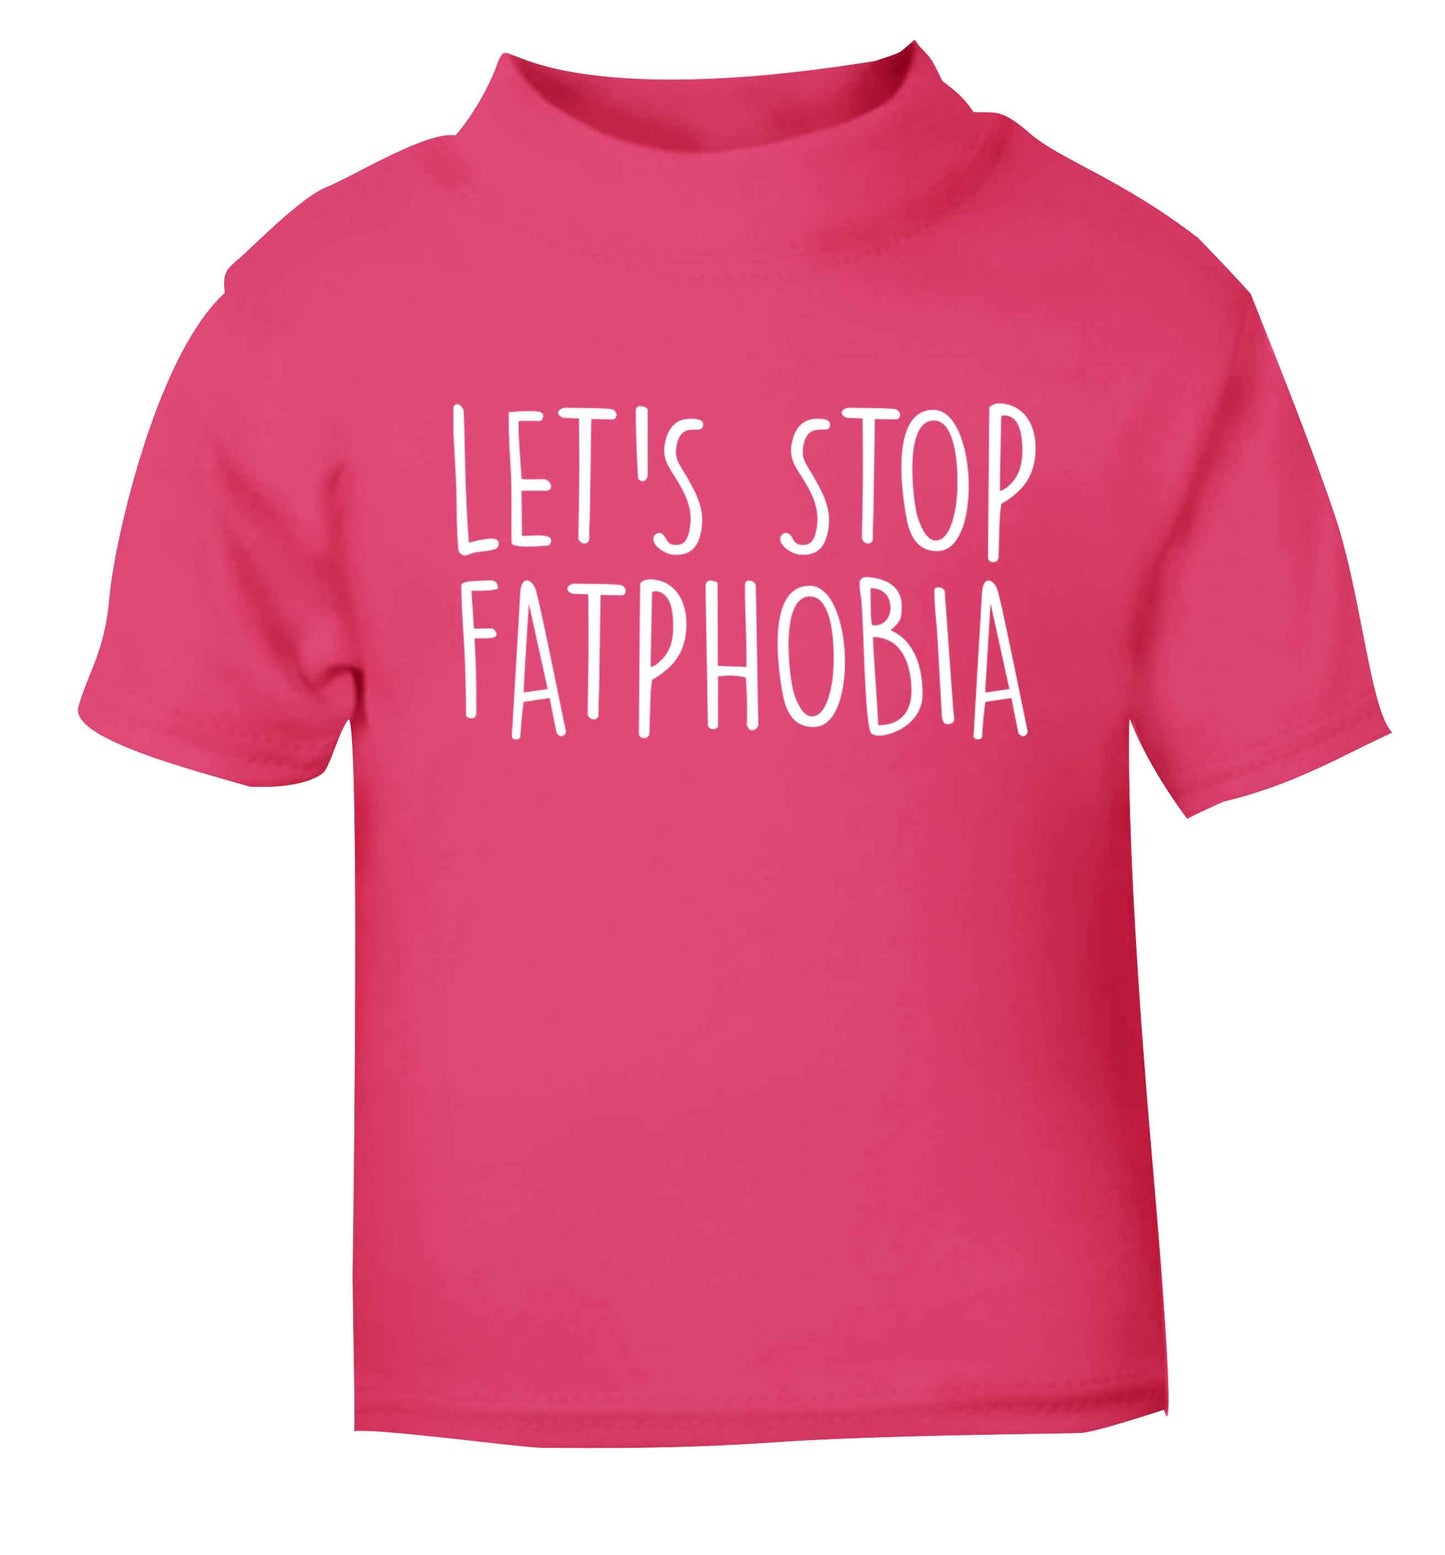 Let's stop fatphobia pink baby toddler Tshirt 2 Years